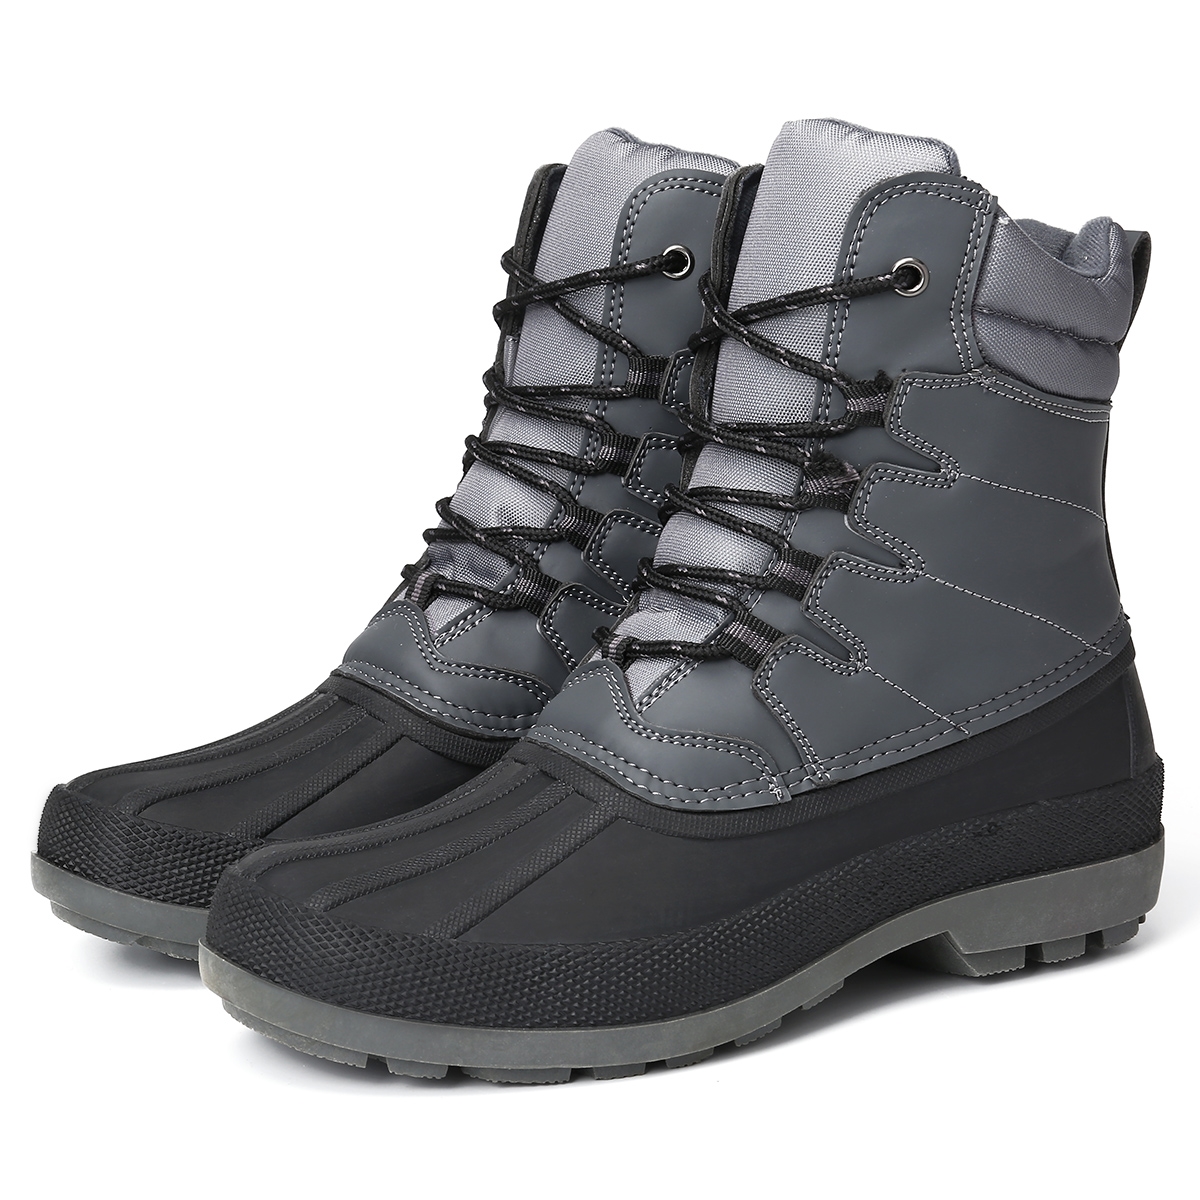 gracosy Snow Boots for Men, Hunter Winter Warm Waterproof Leather ...